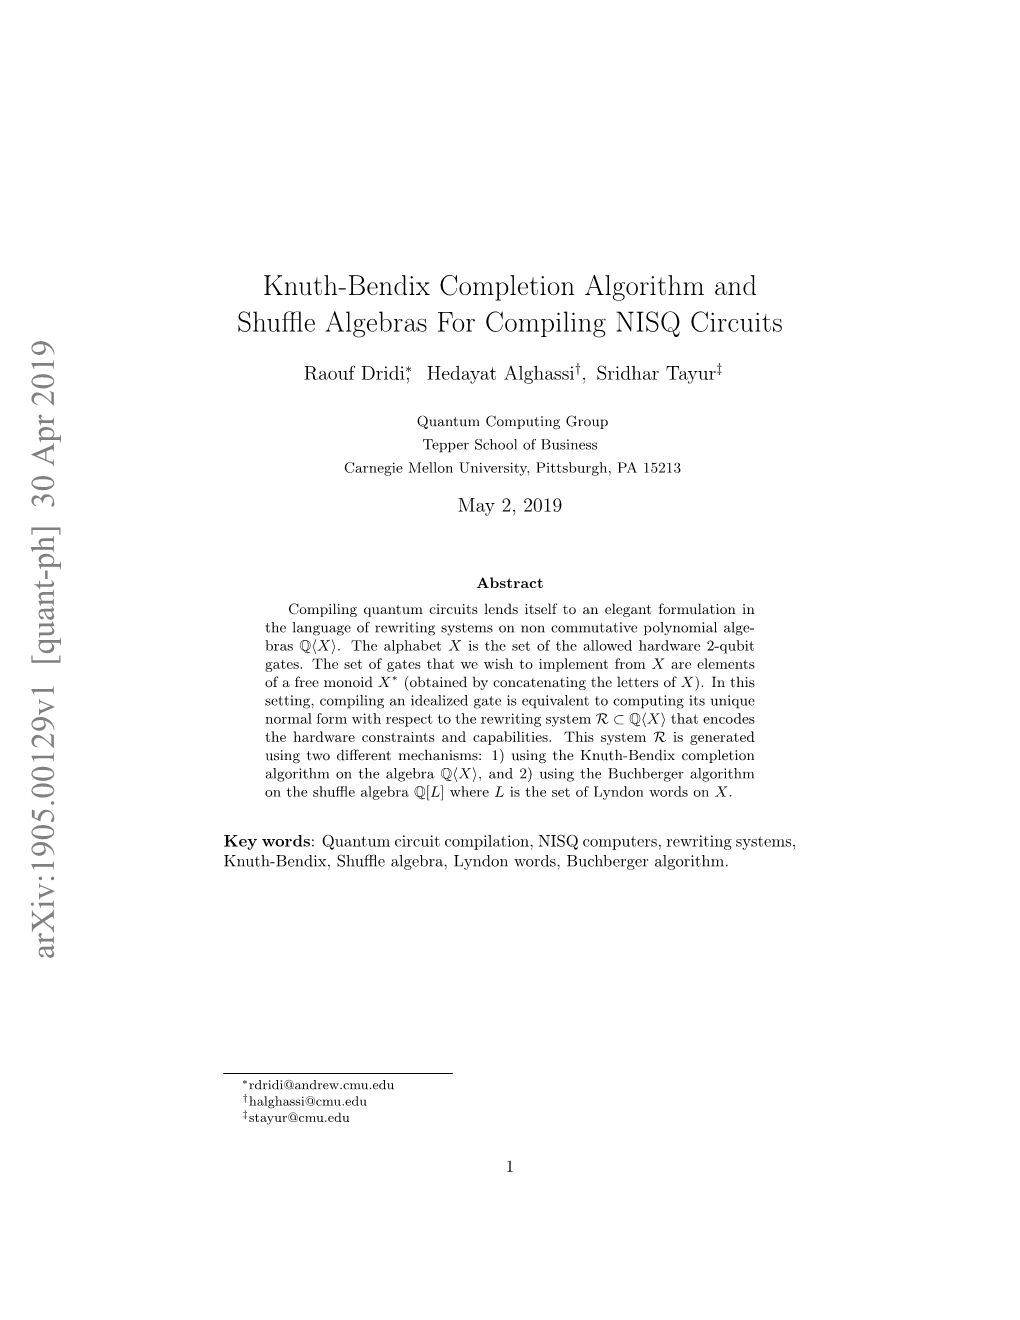 Knuth-Bendix Completion Algorithm and Shuffle Algebras for Compiling NISQ Circuits